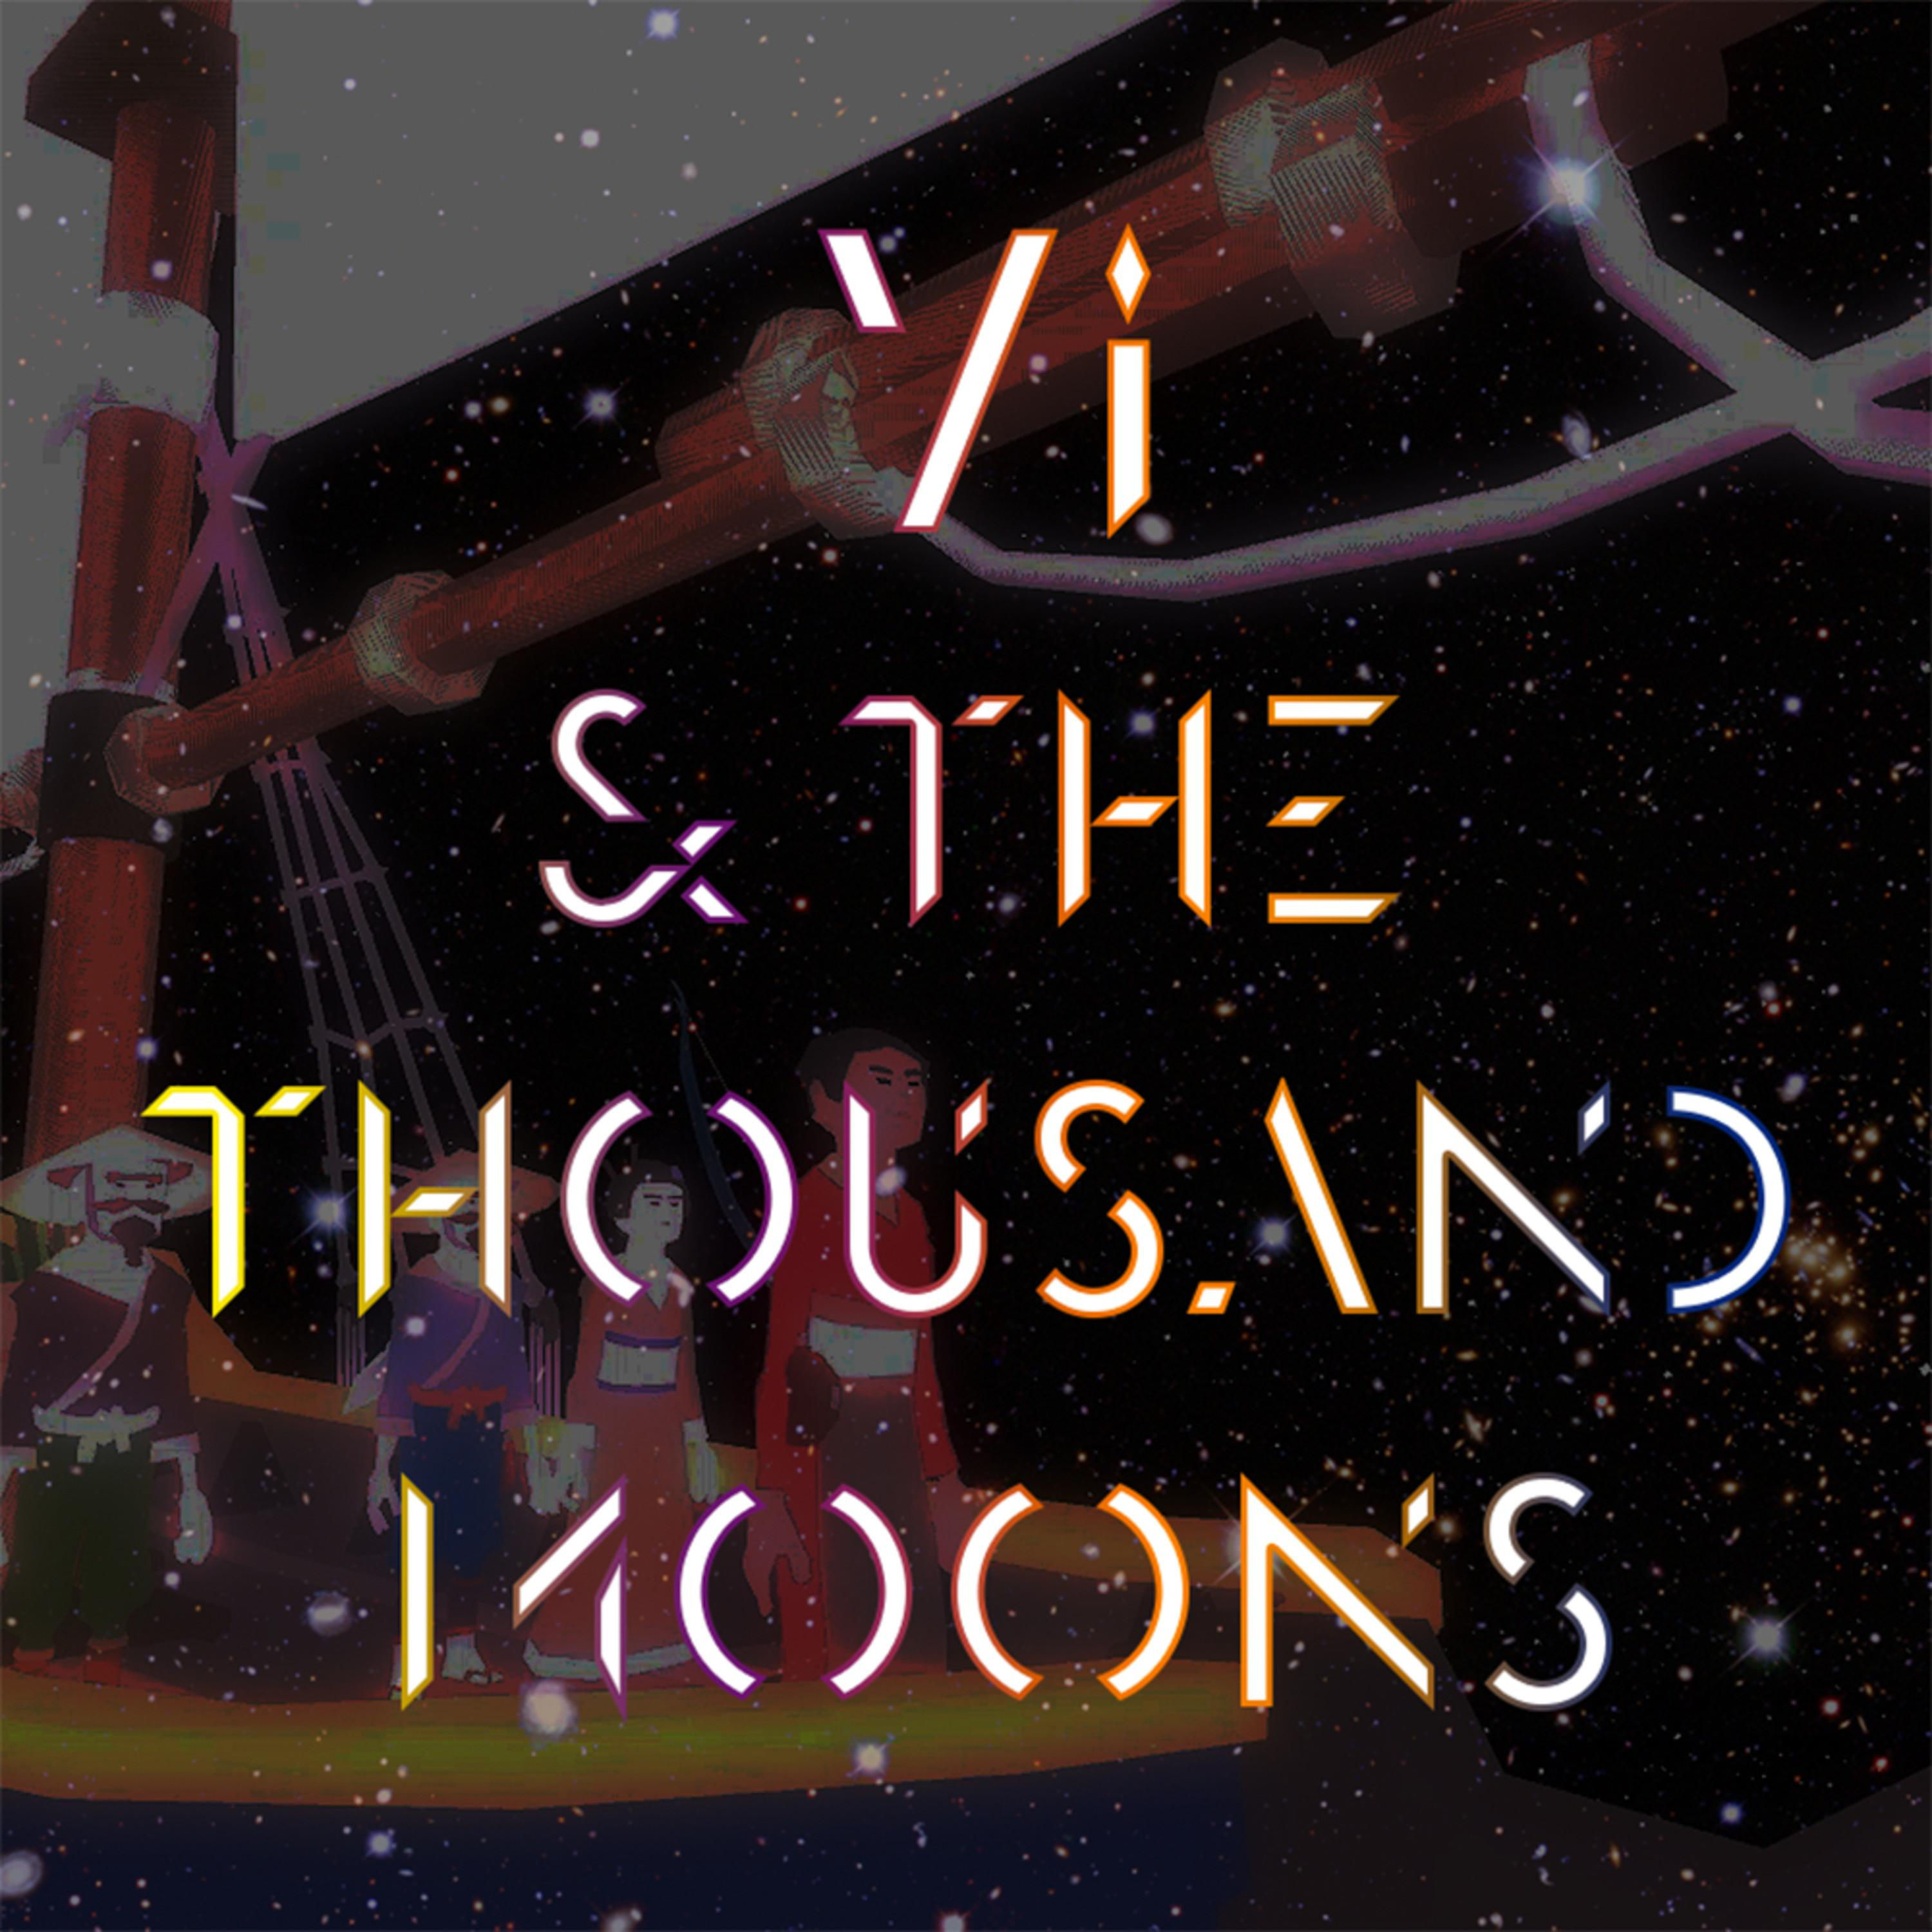 Twelve thousand of the moons. Yi and the Thousand Moons.